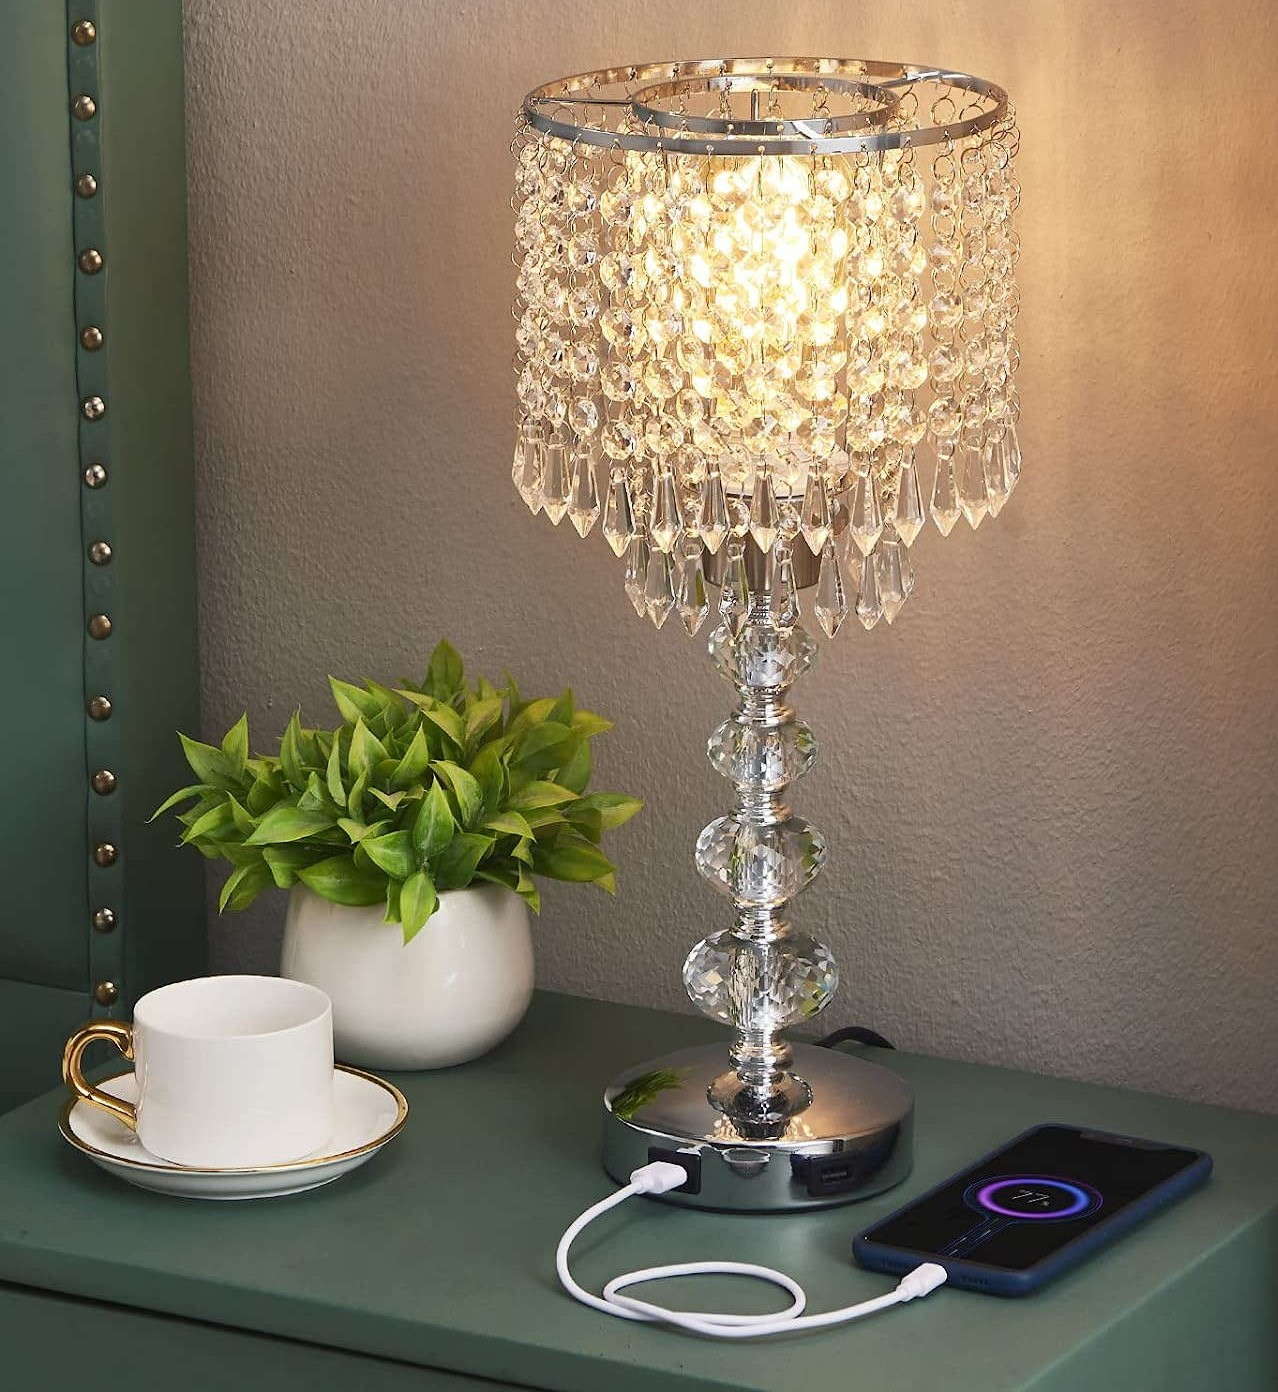 Acaxin Medium Decorative Crystal Table Bedside Lamp with Touch Control, 3-Way Dimmable and Bulb Included, Nightstand Lamp with 2 USB Charging Ports